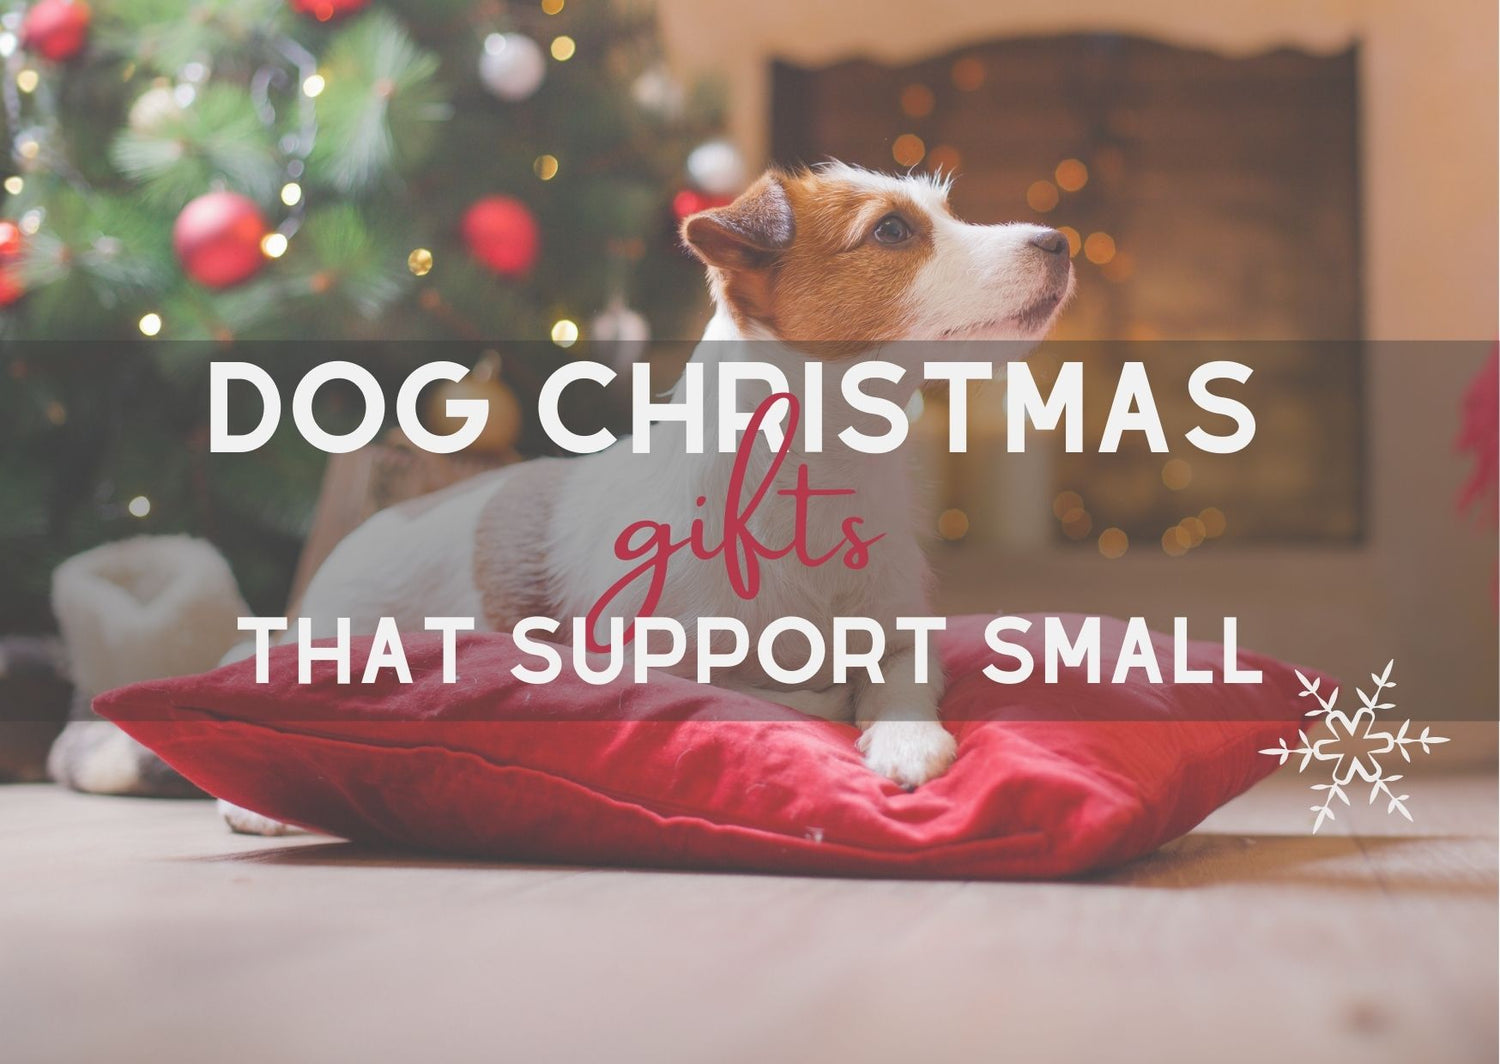 Dog Christmas Gifts that support small